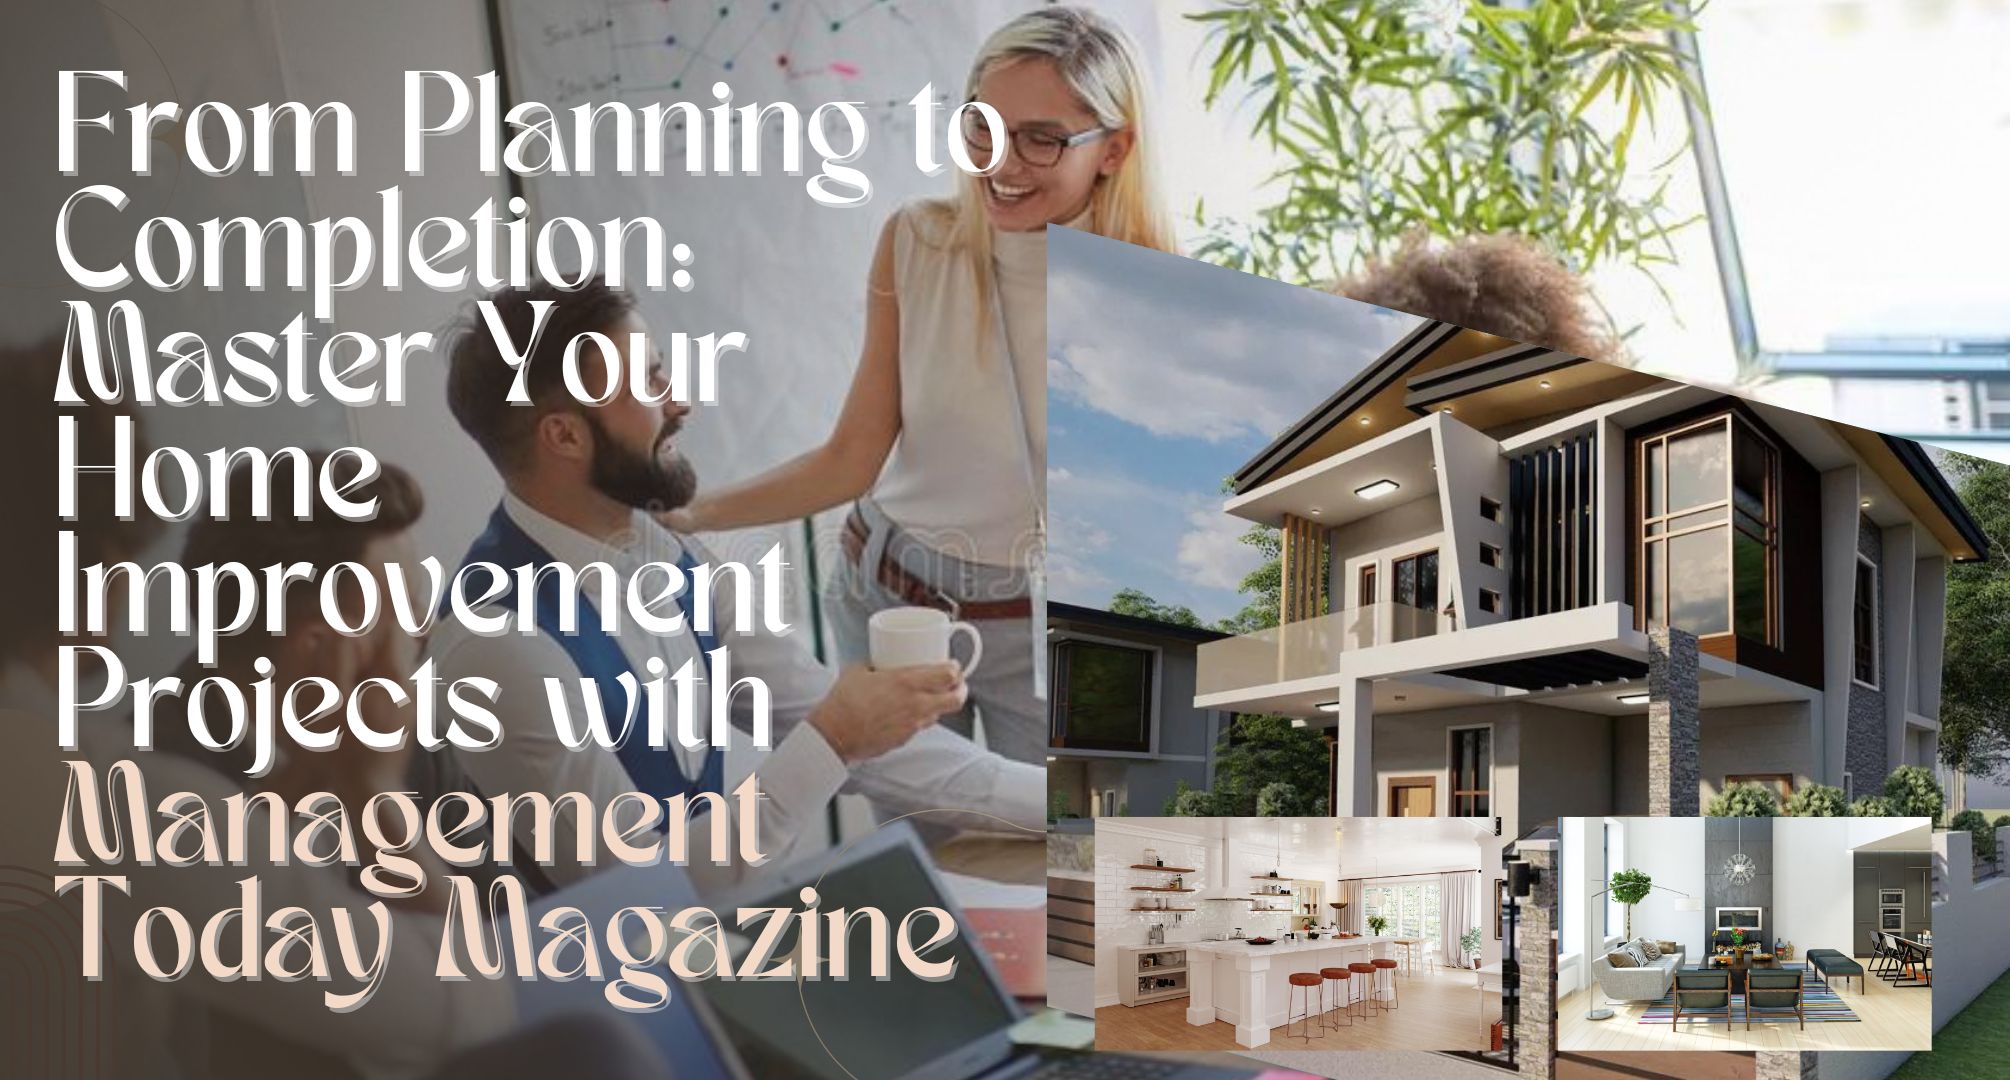 From Planning to Completion: Master Your Home Improvement Projects with Management Today Magazine